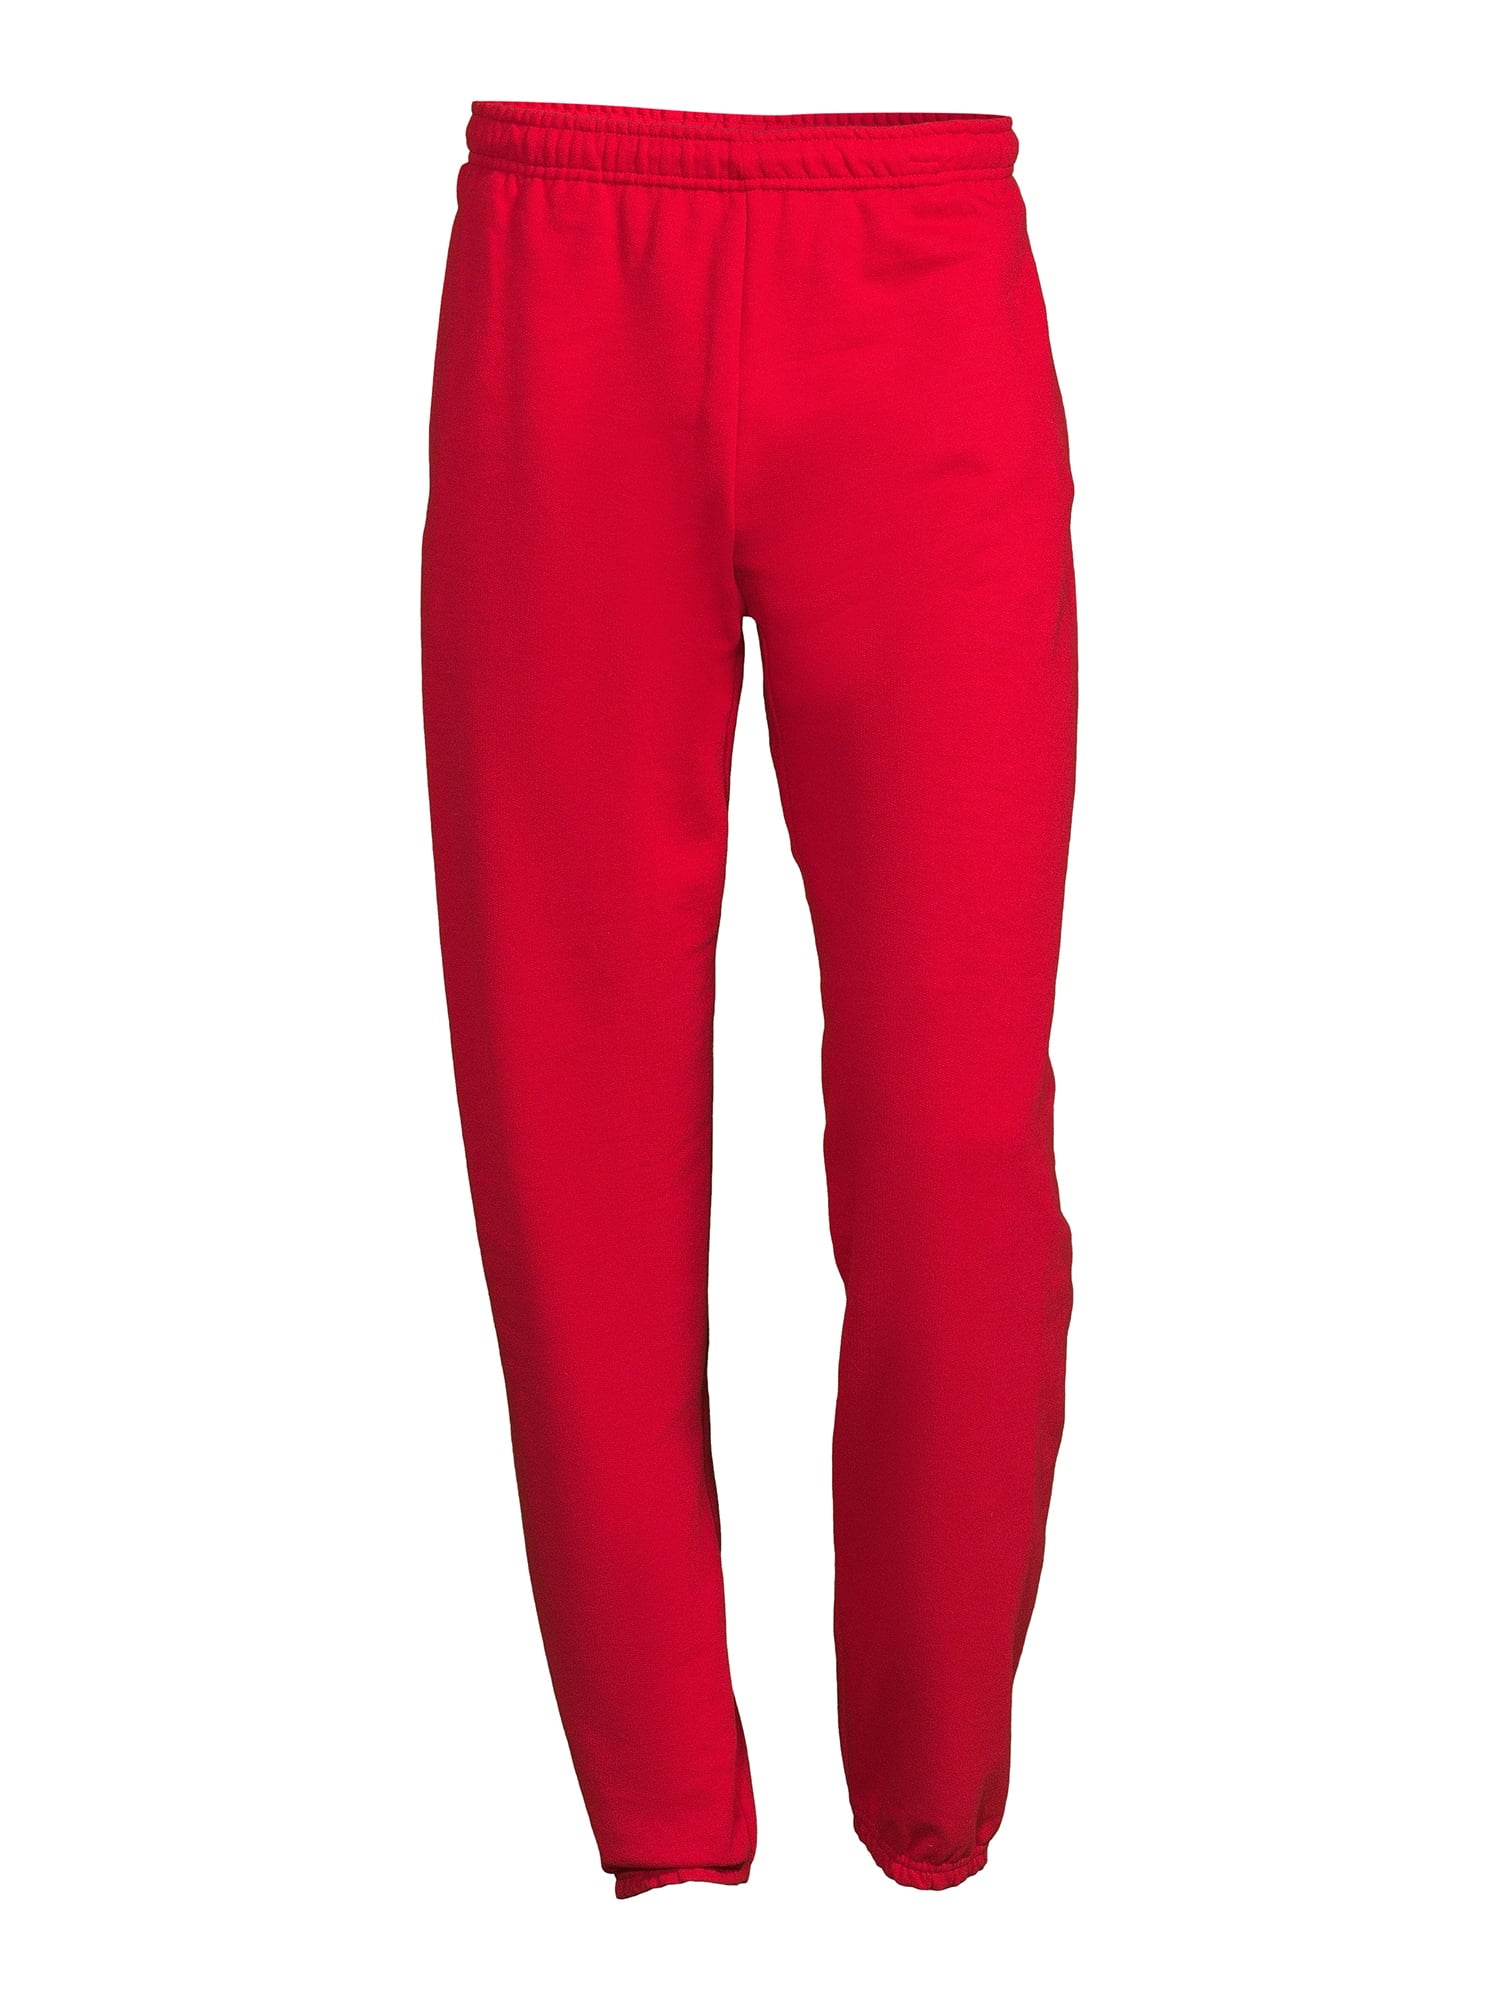 Where To Get Red Sweatpants? – solowomen